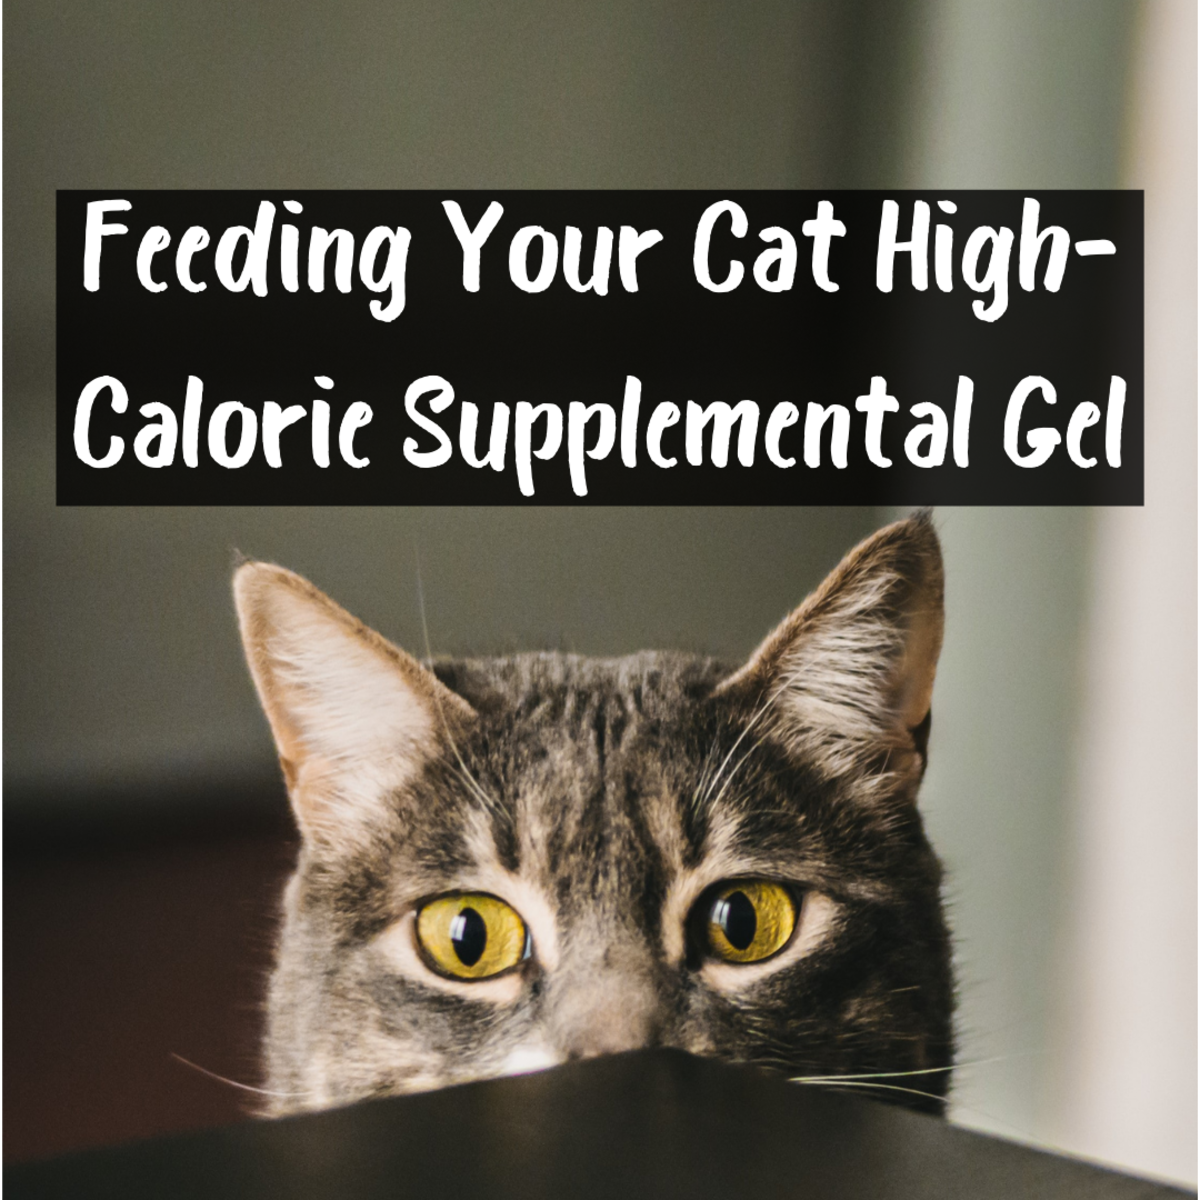 How to Give Your Cat High-Calorie Supplement Gel